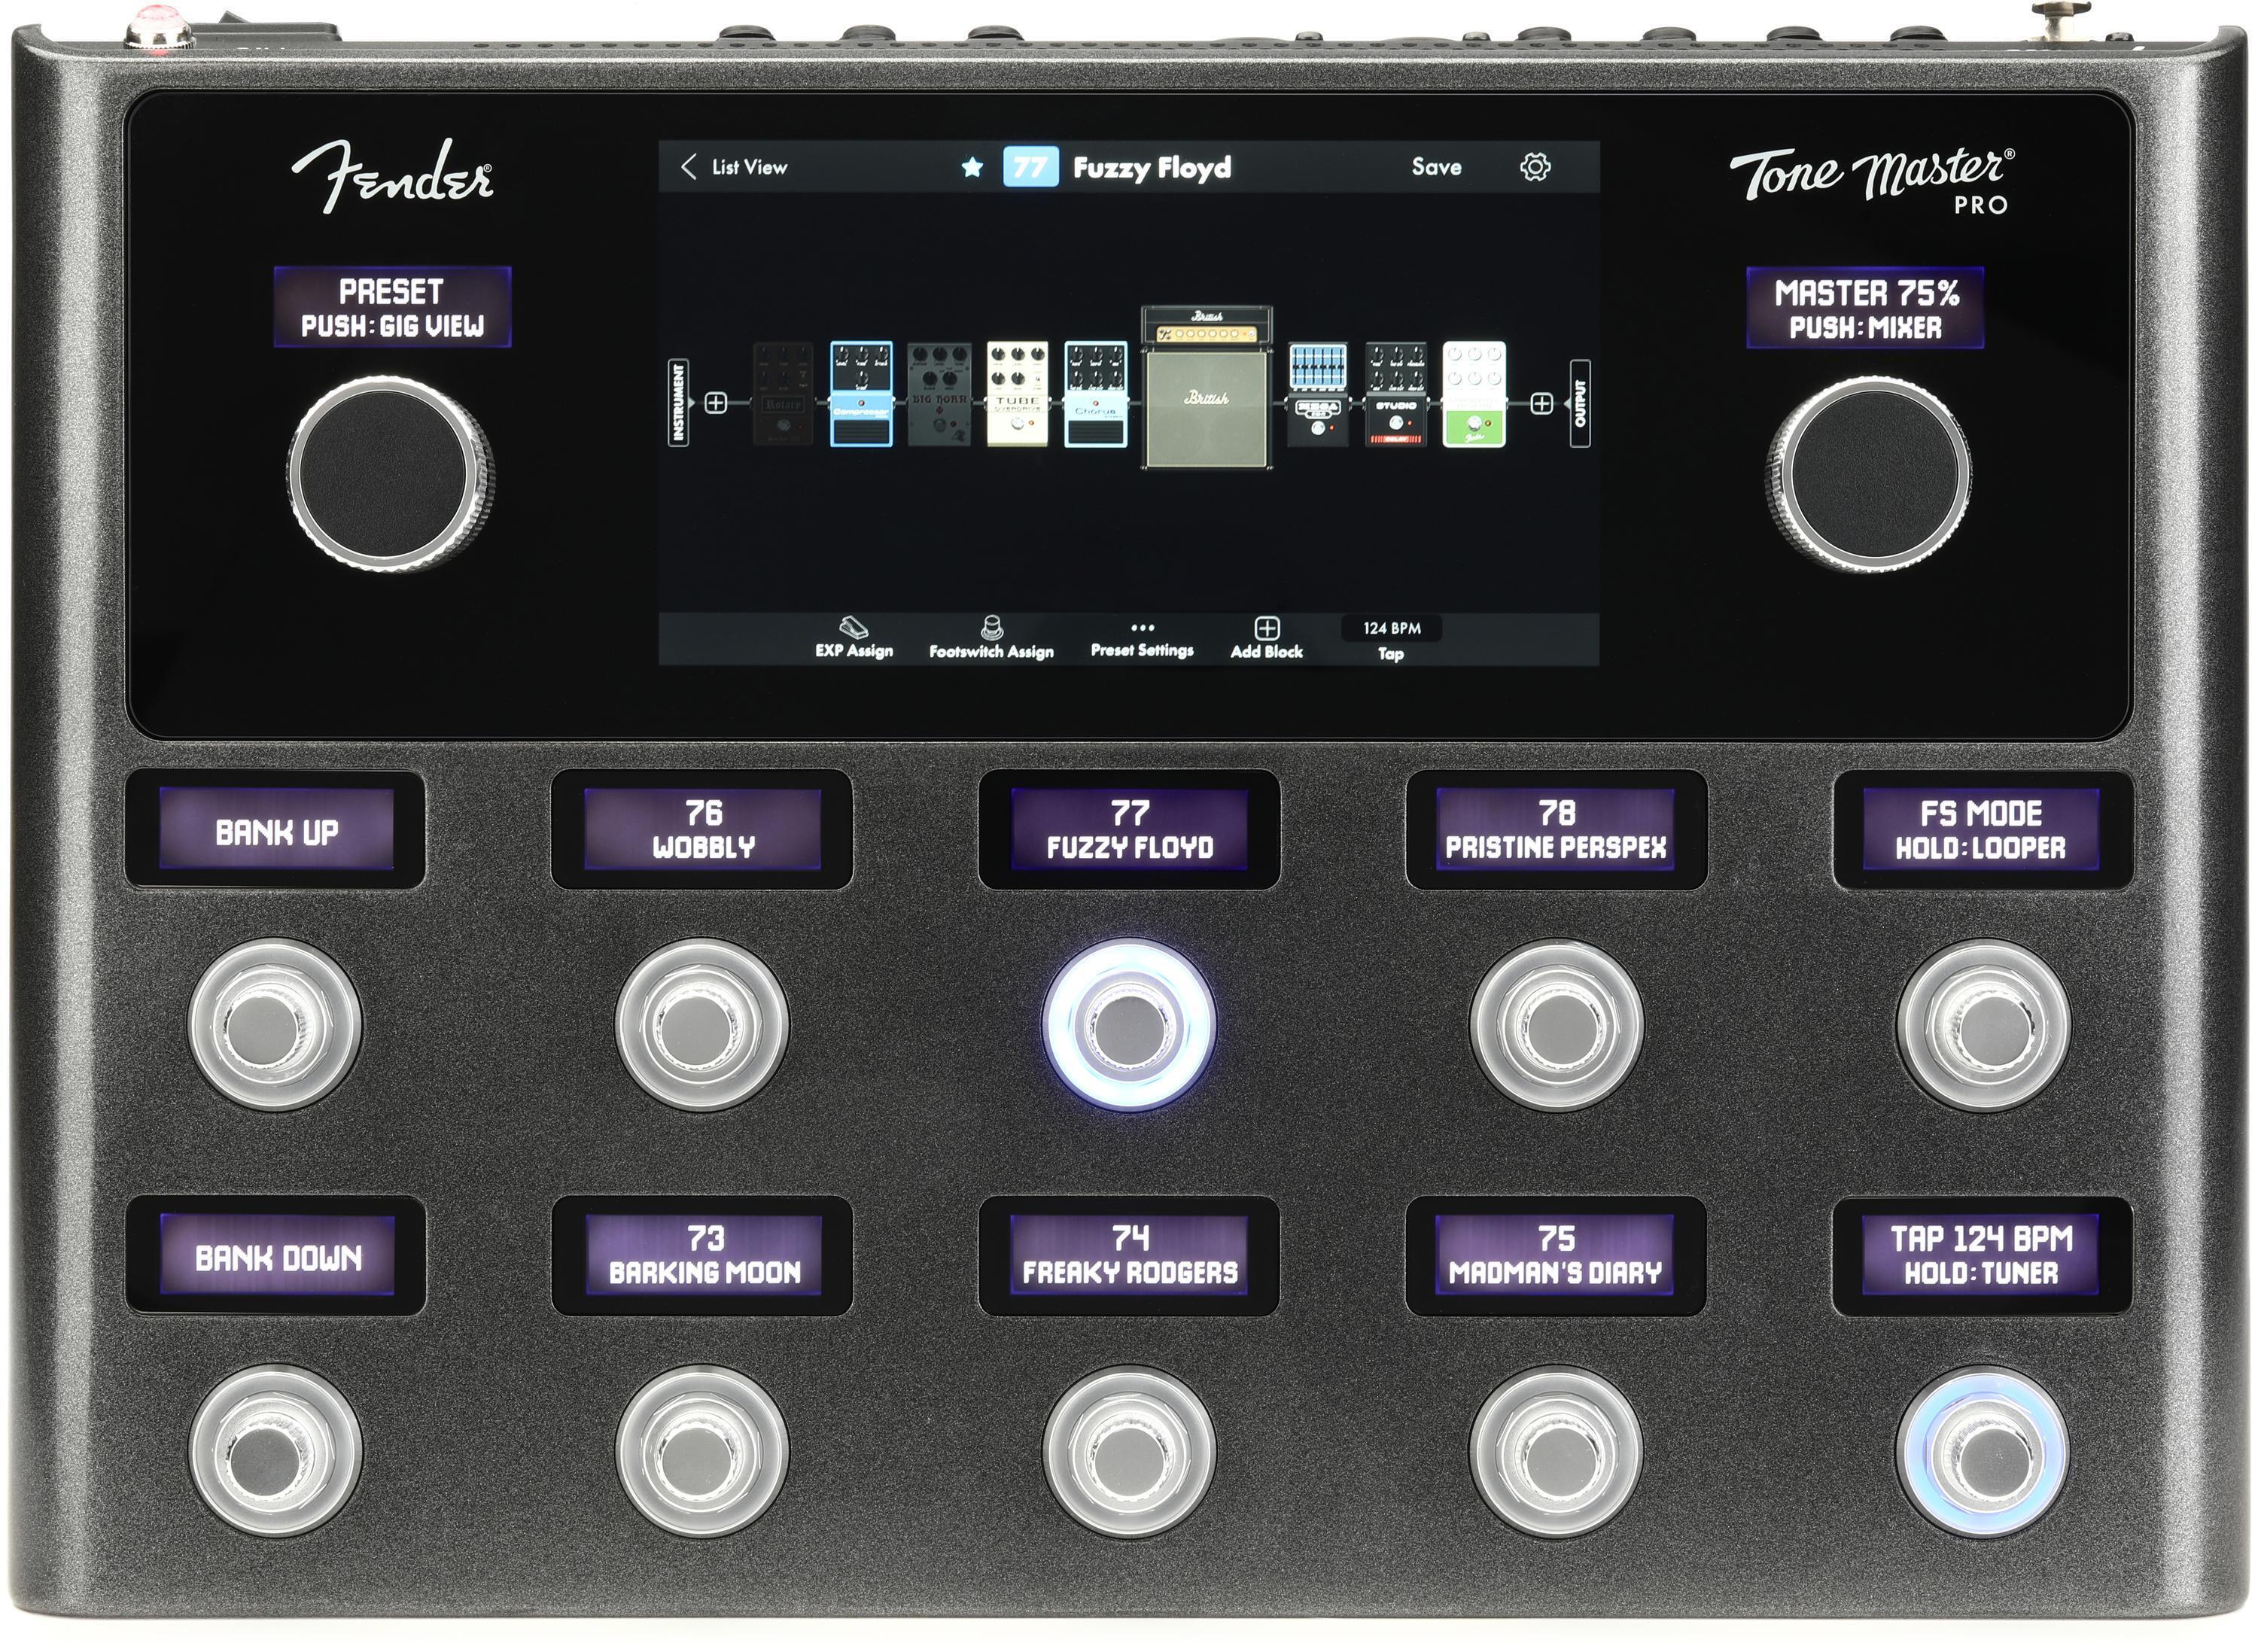 Fender Tone Master Pro Multi-effects Guitar Workstation | Sweetwater